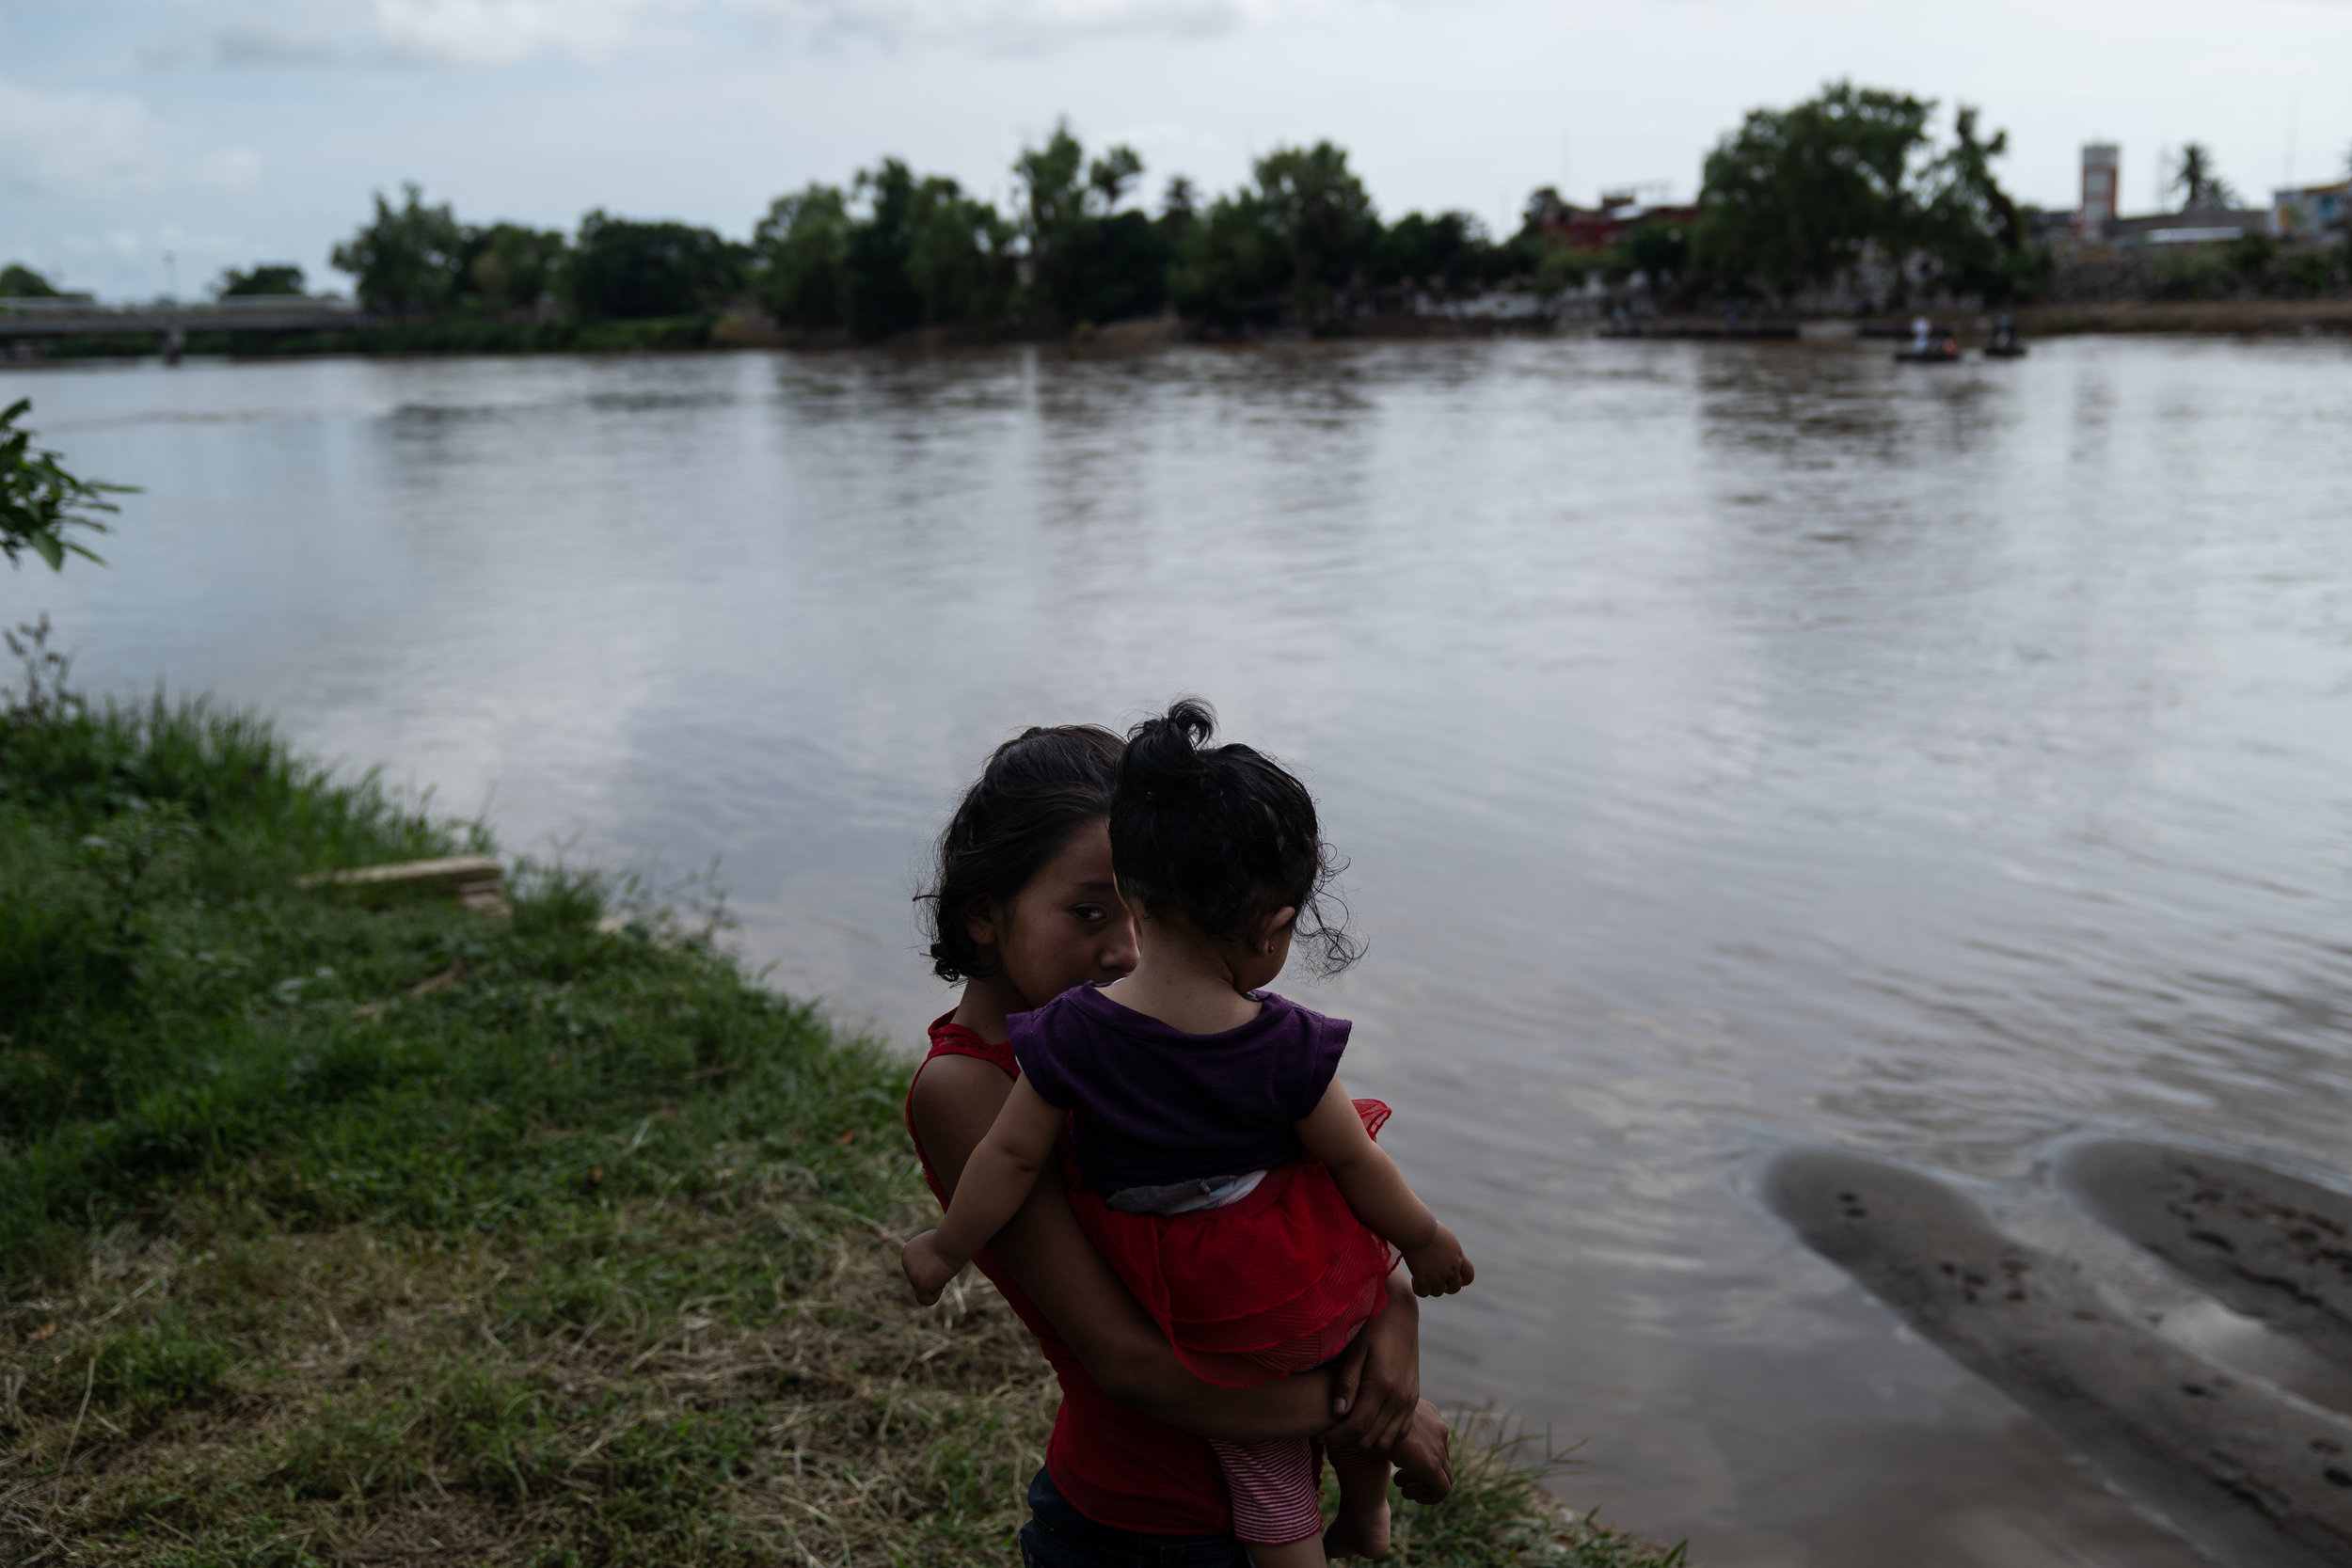   A woman and child stand next to the Suchiate river in Tecún Umán, Guatemala, 2018.   